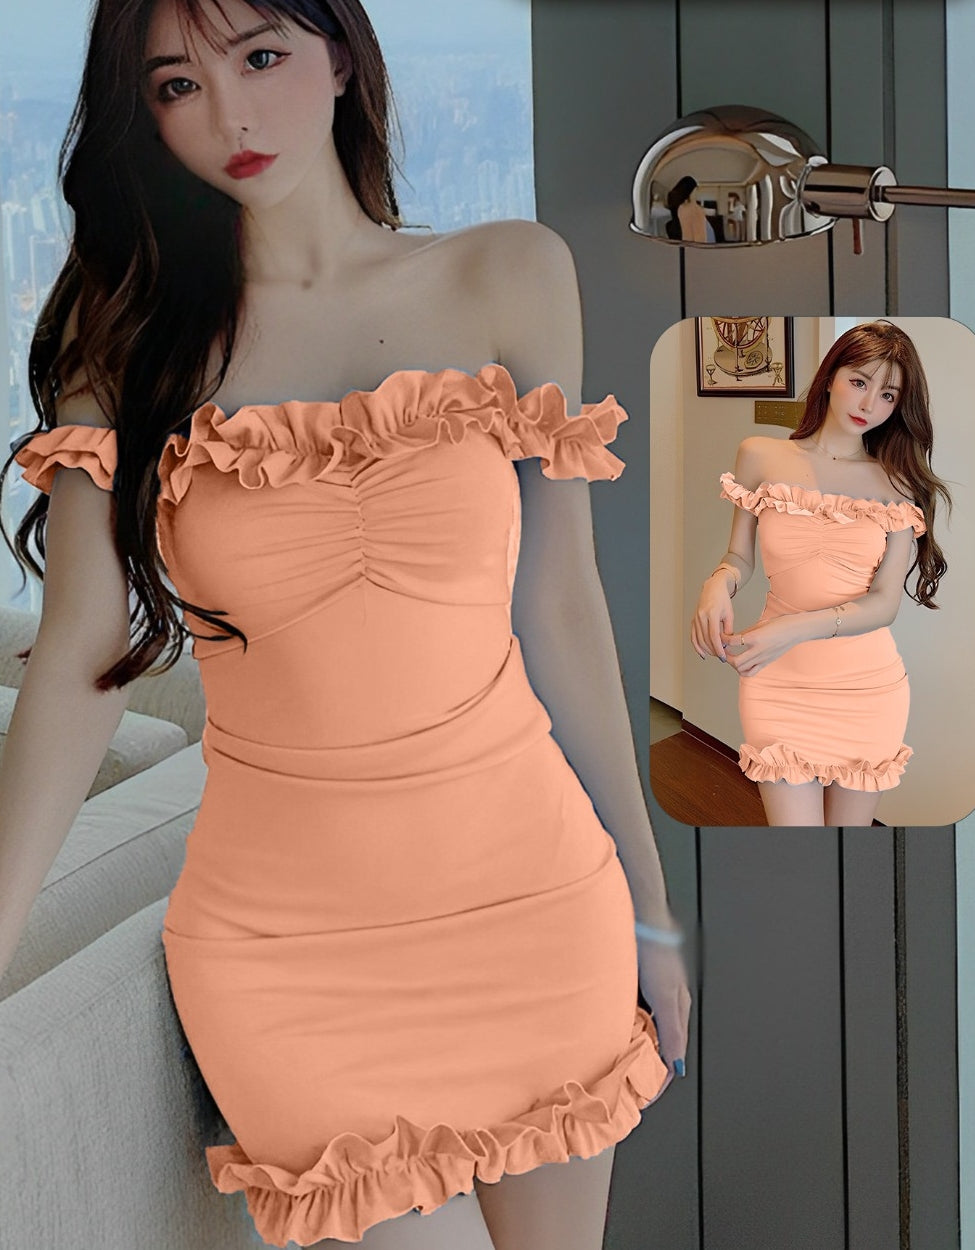 Lycra off-shoulder house dress - with ruffles from the tail and at the chest